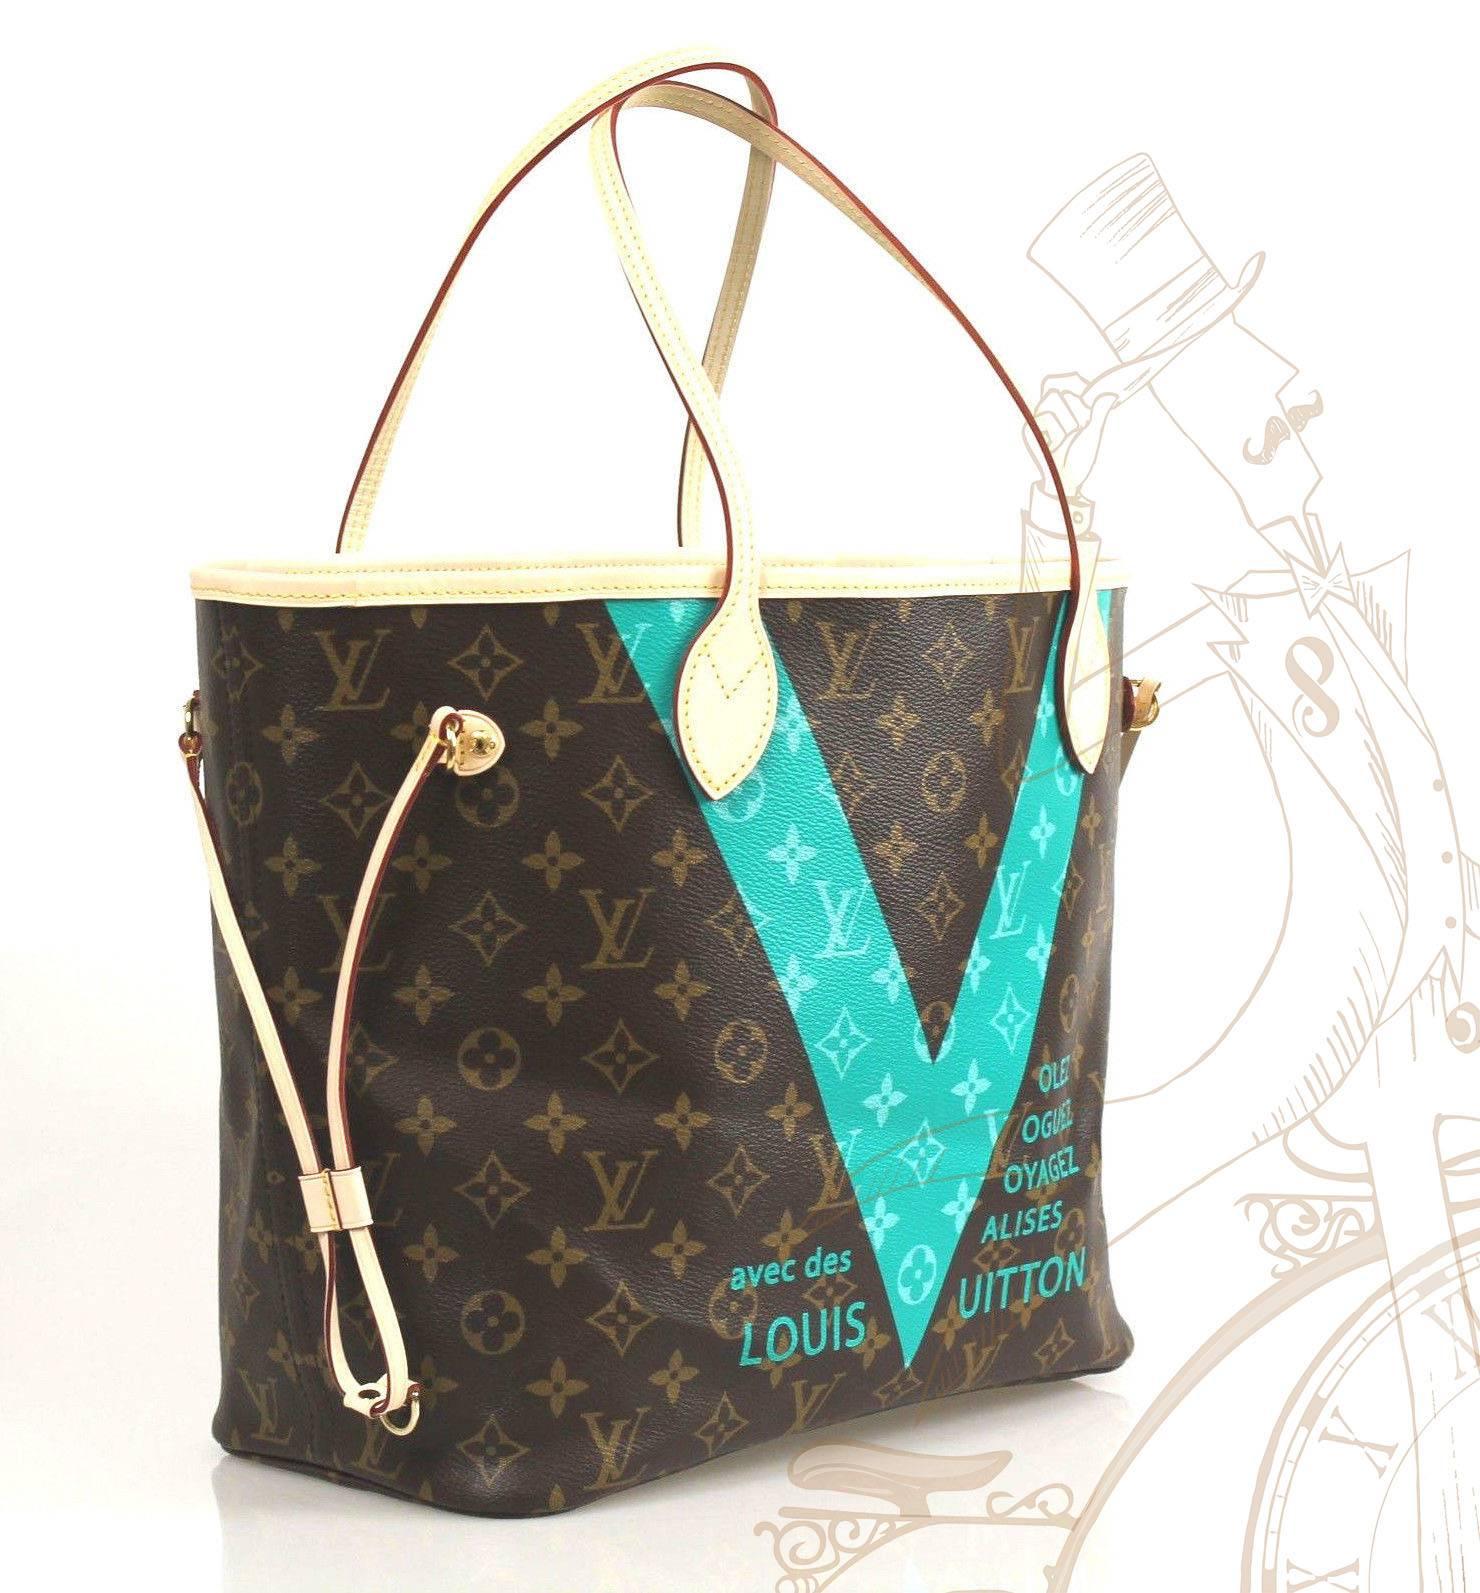 The Never-full MM Monogram V is inspired by a famous Louis Vuitton ad from the 1960's. Monogram canvas easily mixes with the stylish 